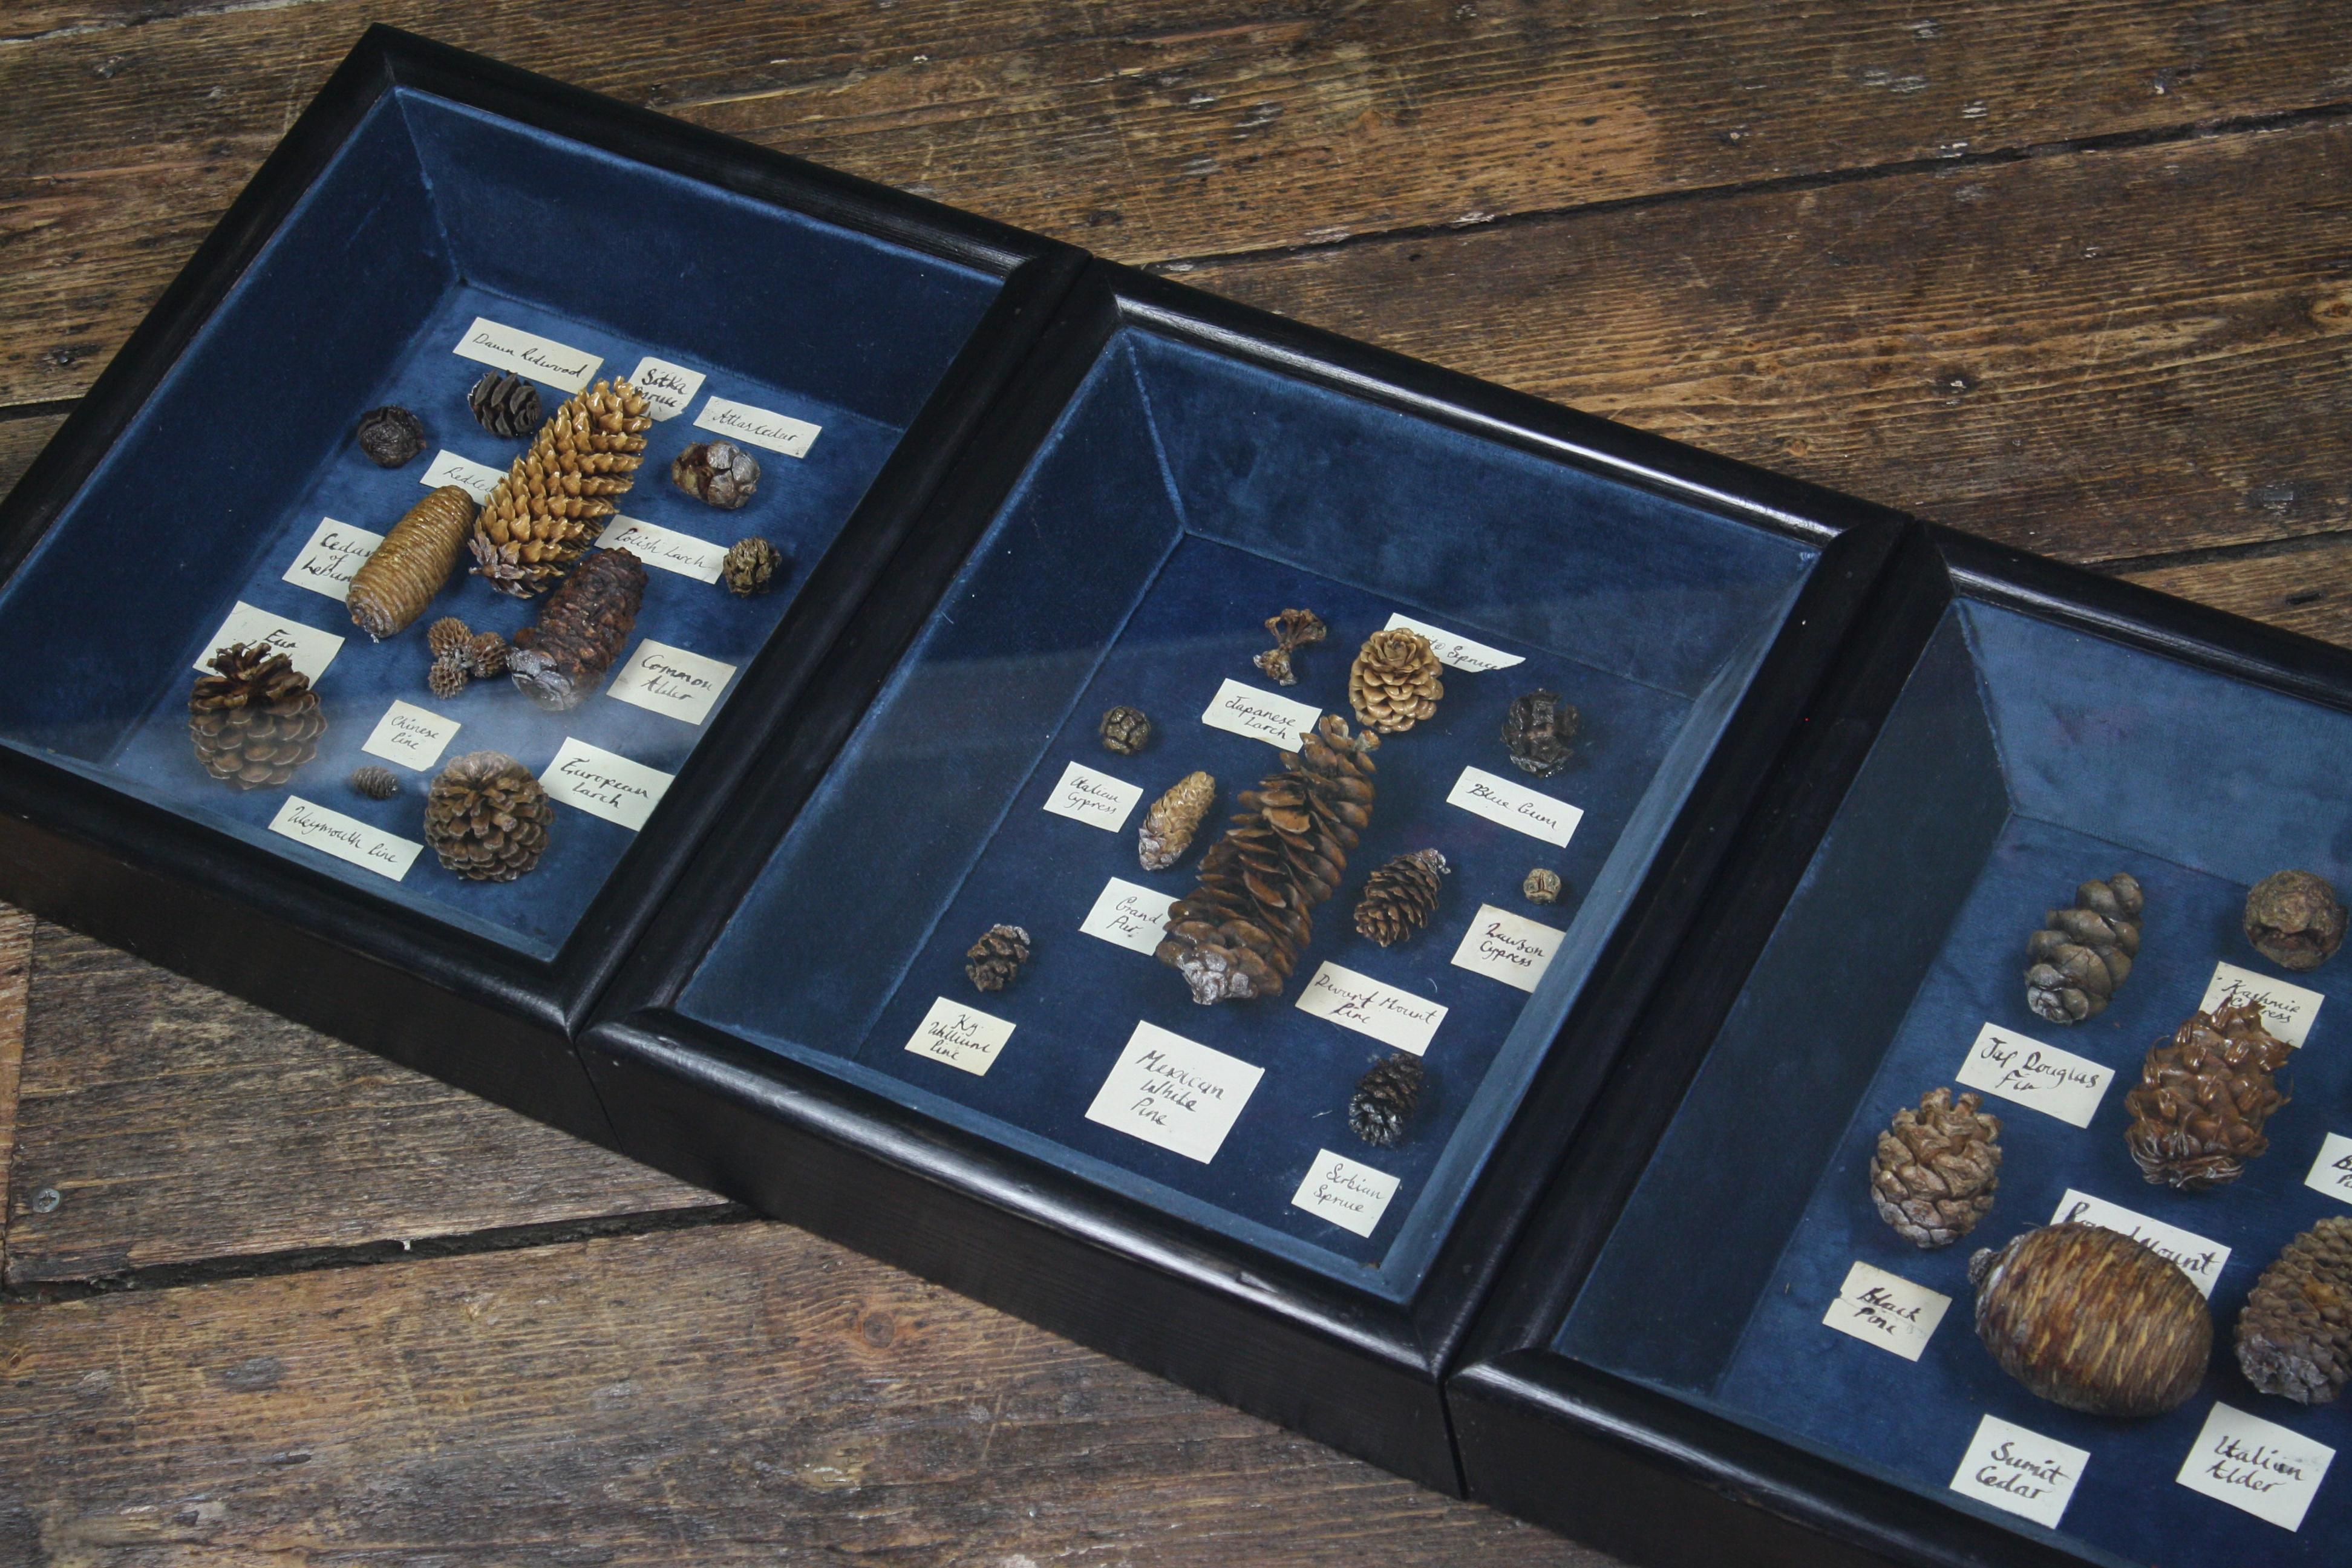 Collection of 69 Global Conifer Ferns Shadow Boxes Natural History Specimens 6